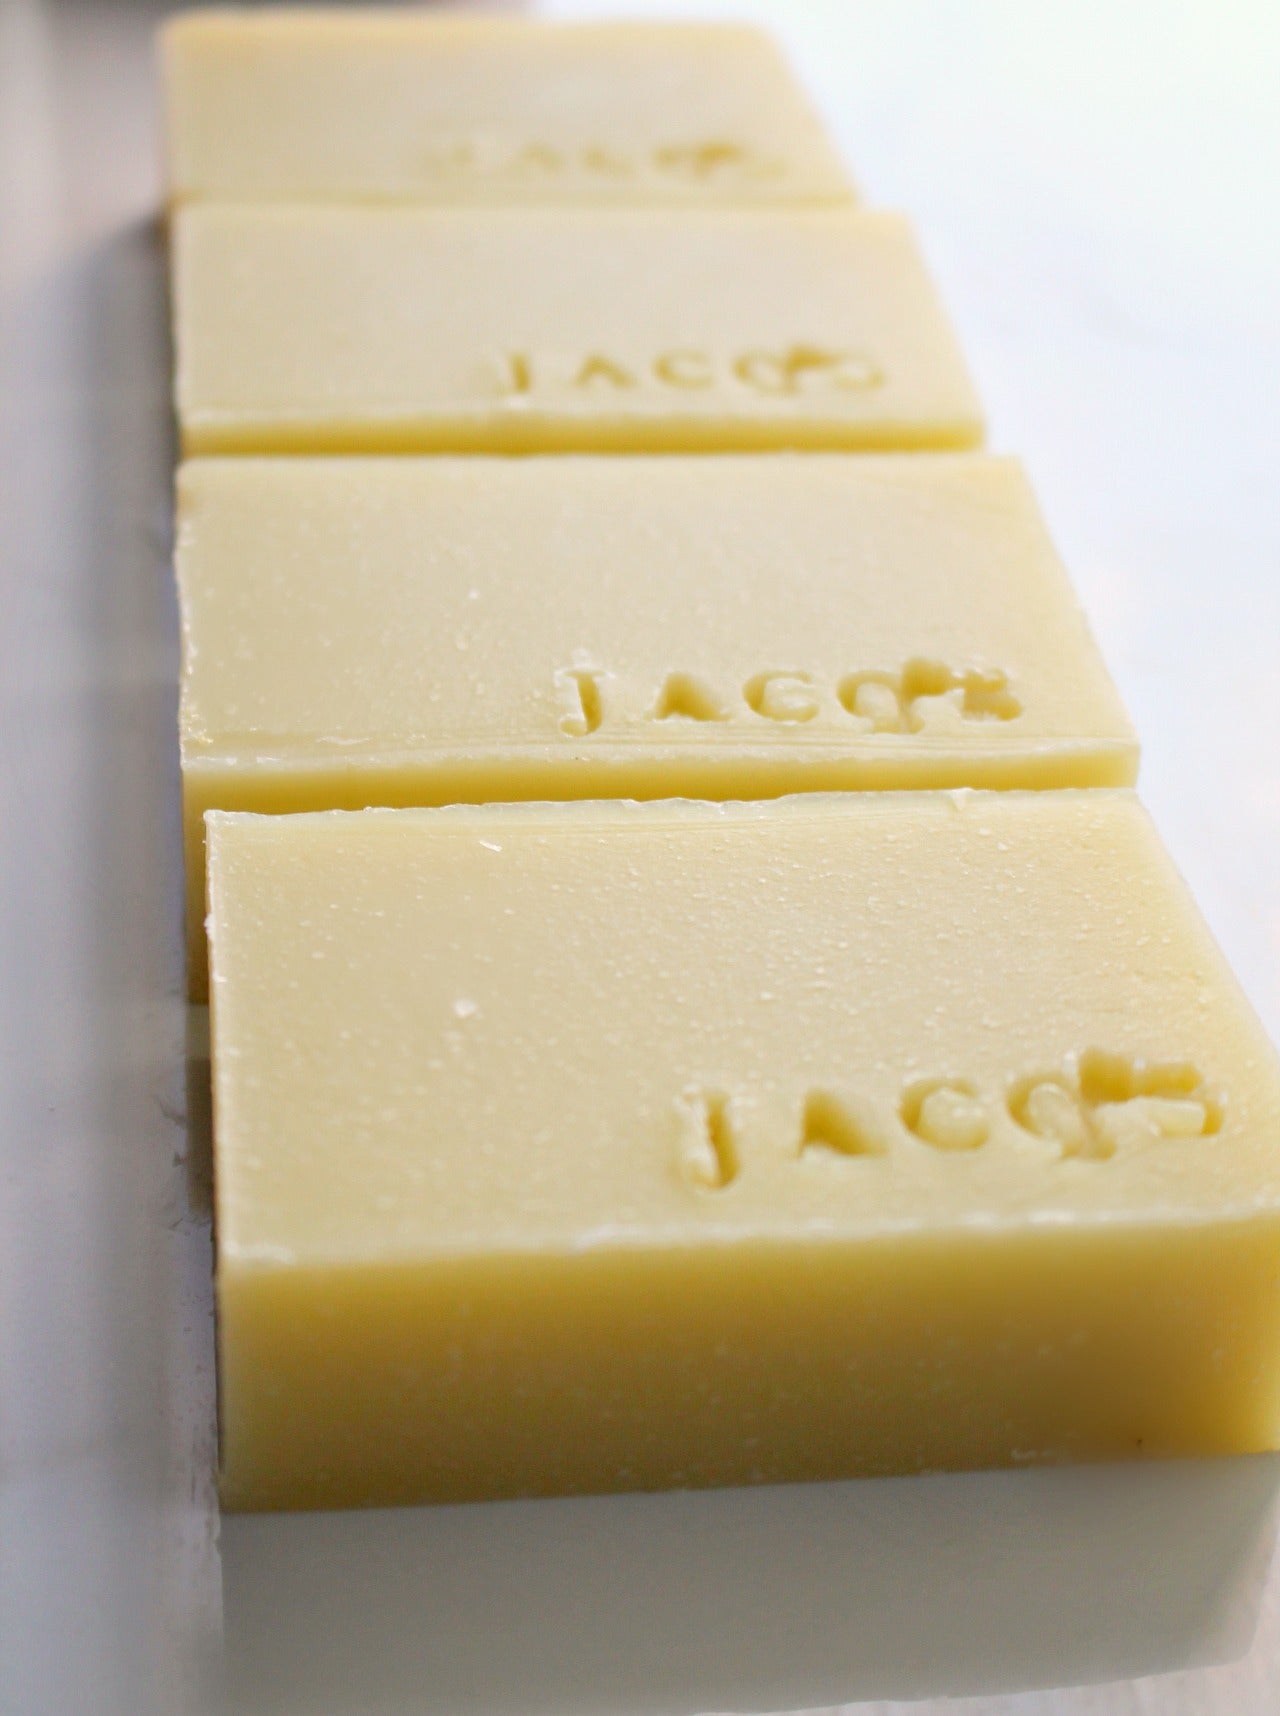 JACQ's Yucca & Lavender Cleansing bar in ar ow